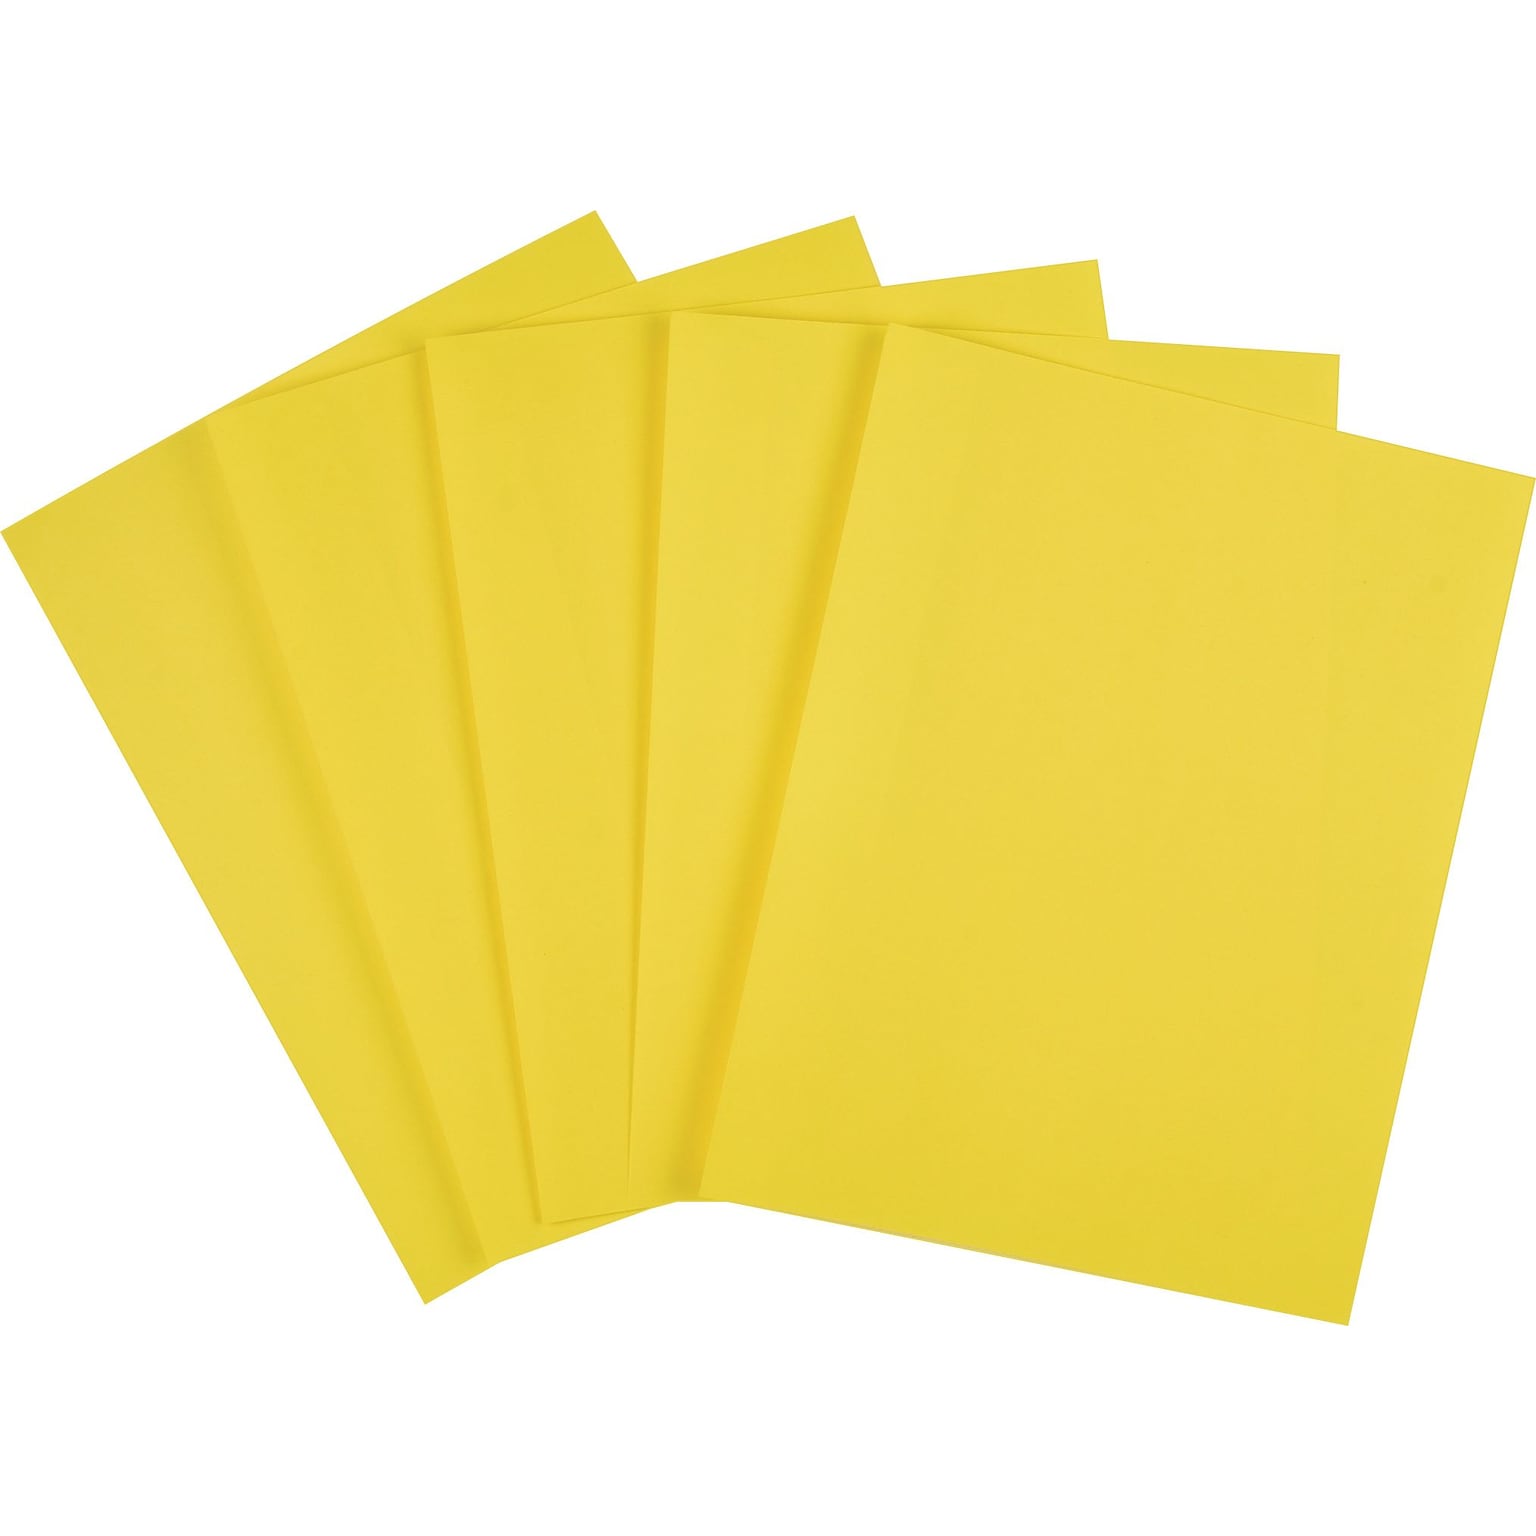 Brights Colored Paper, 8 1/2 x 11, Yellow, Ream, 500/Ream